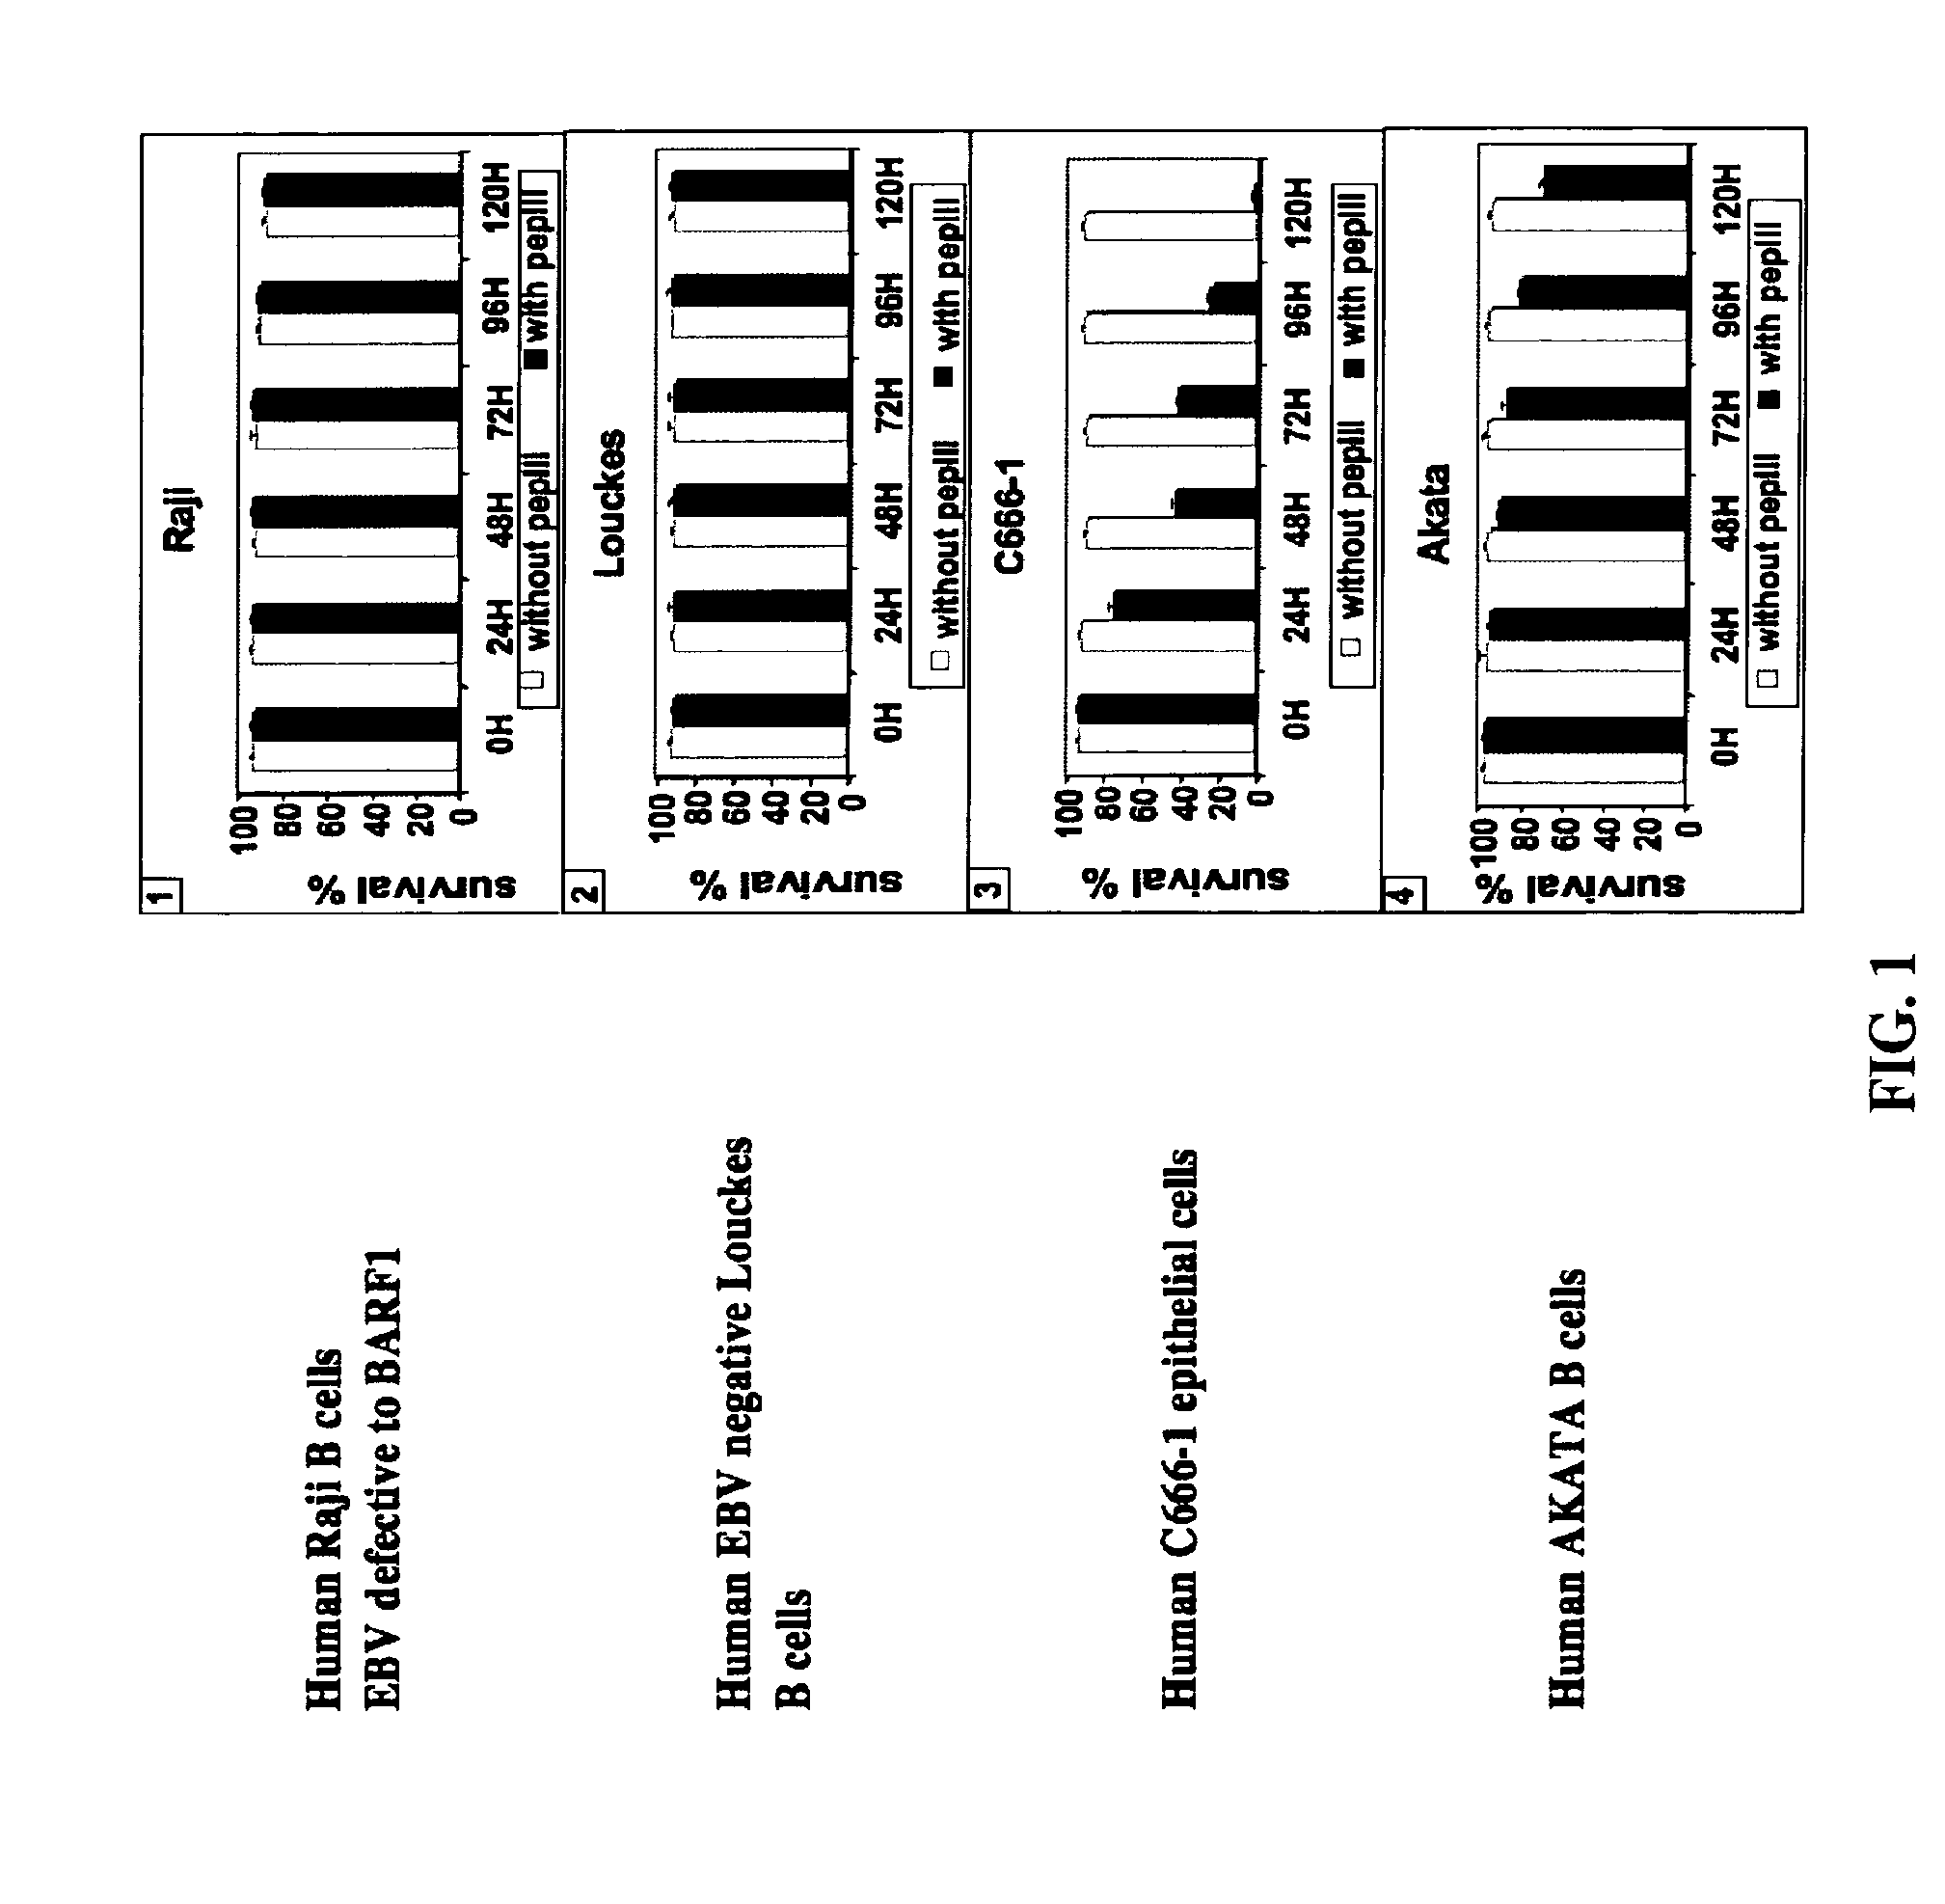 Pharmaceutical Compositions Comprising Antibodies Binding To EBV (Ebstein-Barr Virus) Protein BARF1